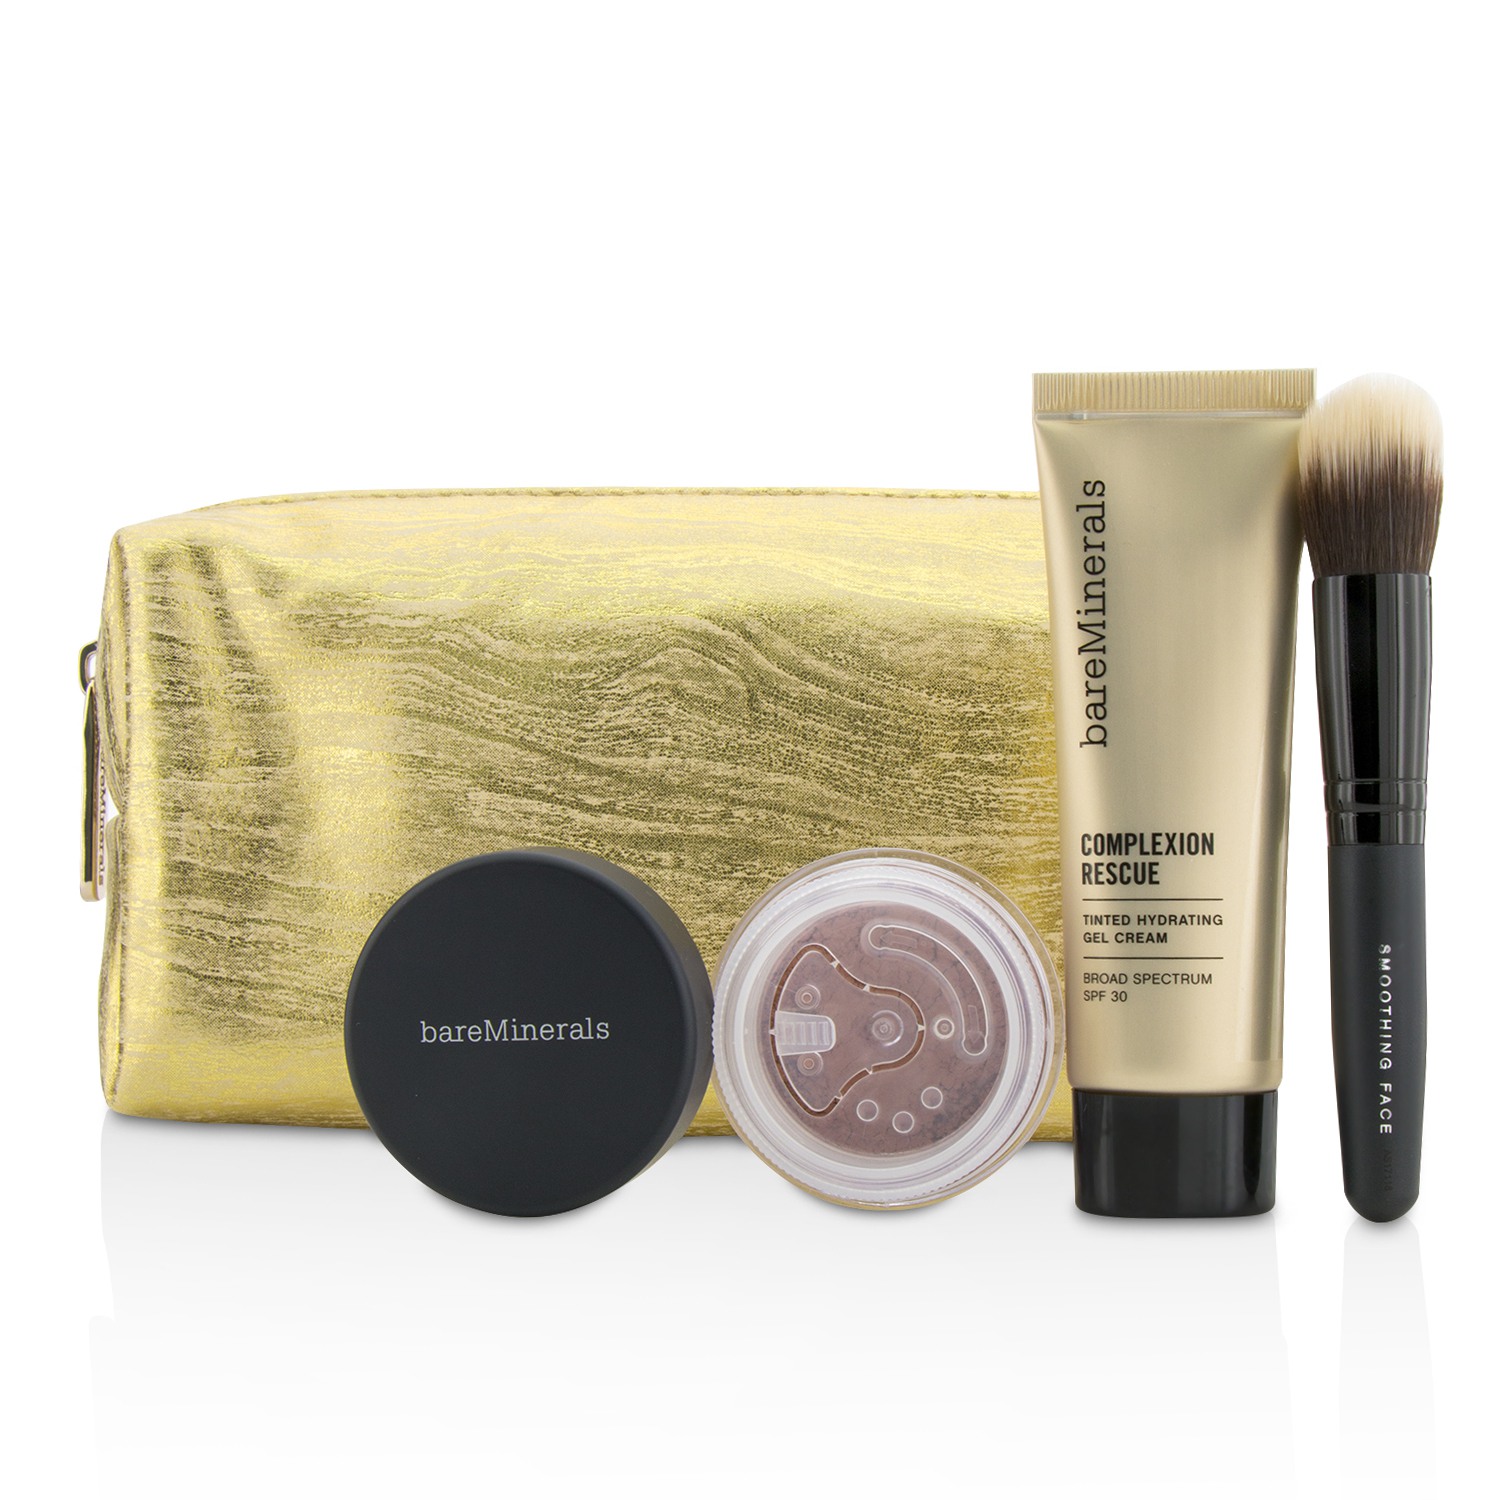 Take Me With You Complexion Rescue Try Me Set - # 05 Natural BareMinerals Image